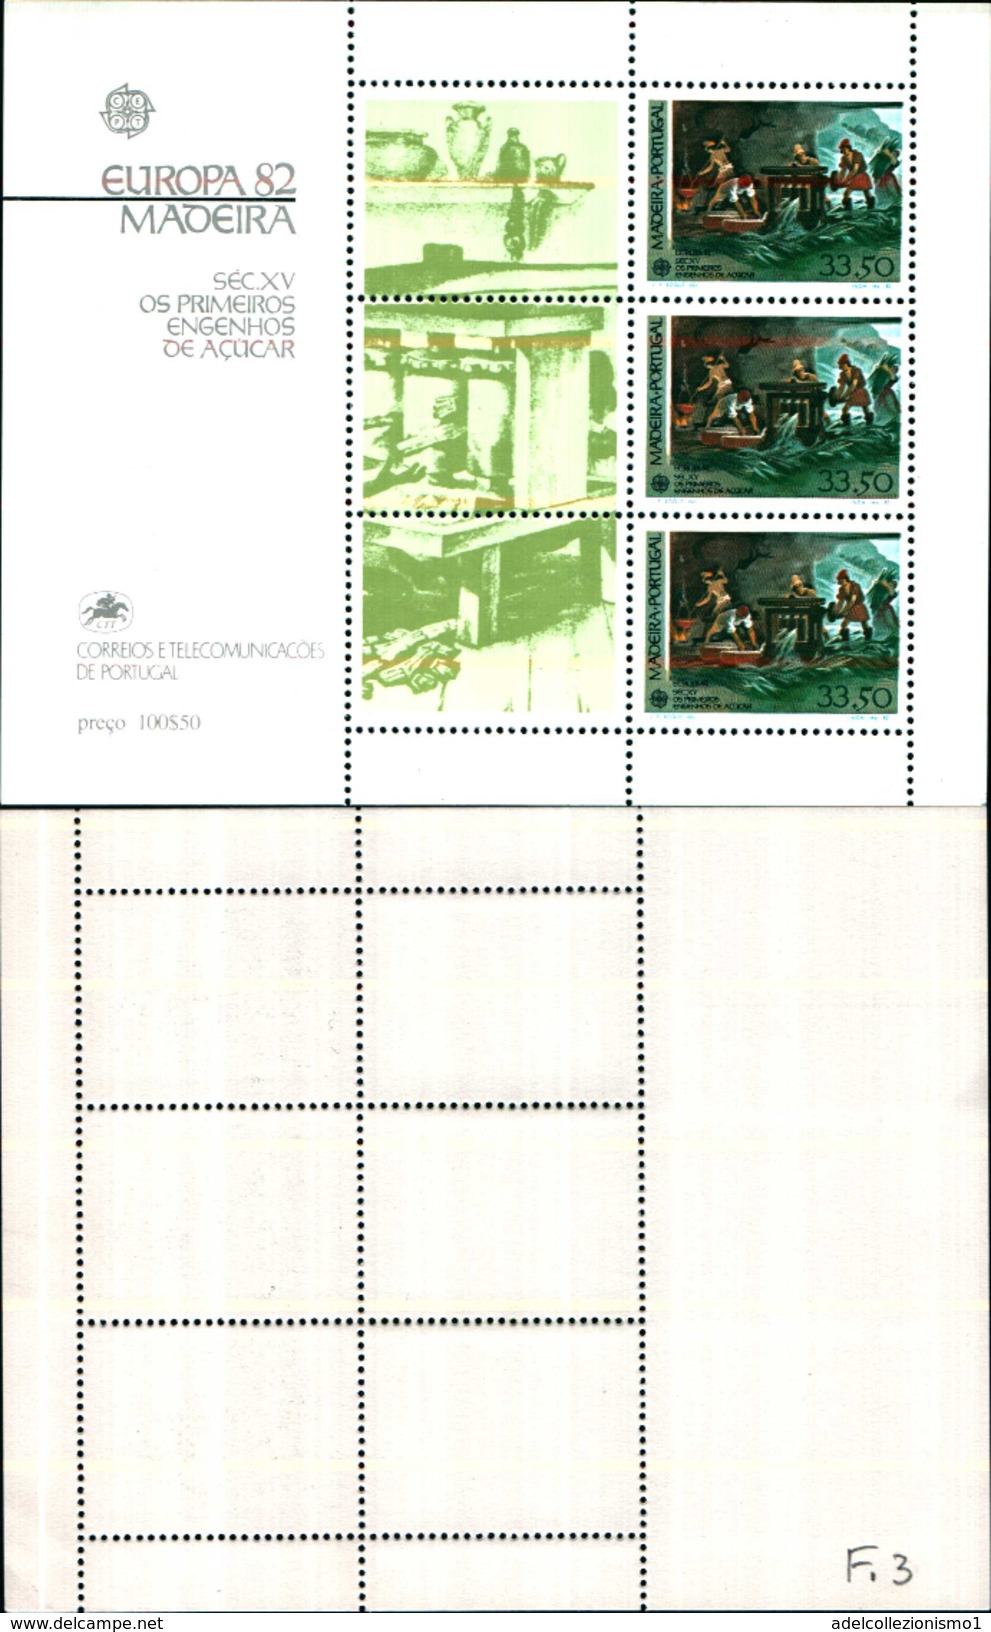 86805) TIMBRES STAMP BLOC FEUILLET EUROPA 82 MADEIRA MADERE PORTUGAL 1982 - Feuilles Complètes Et Multiples